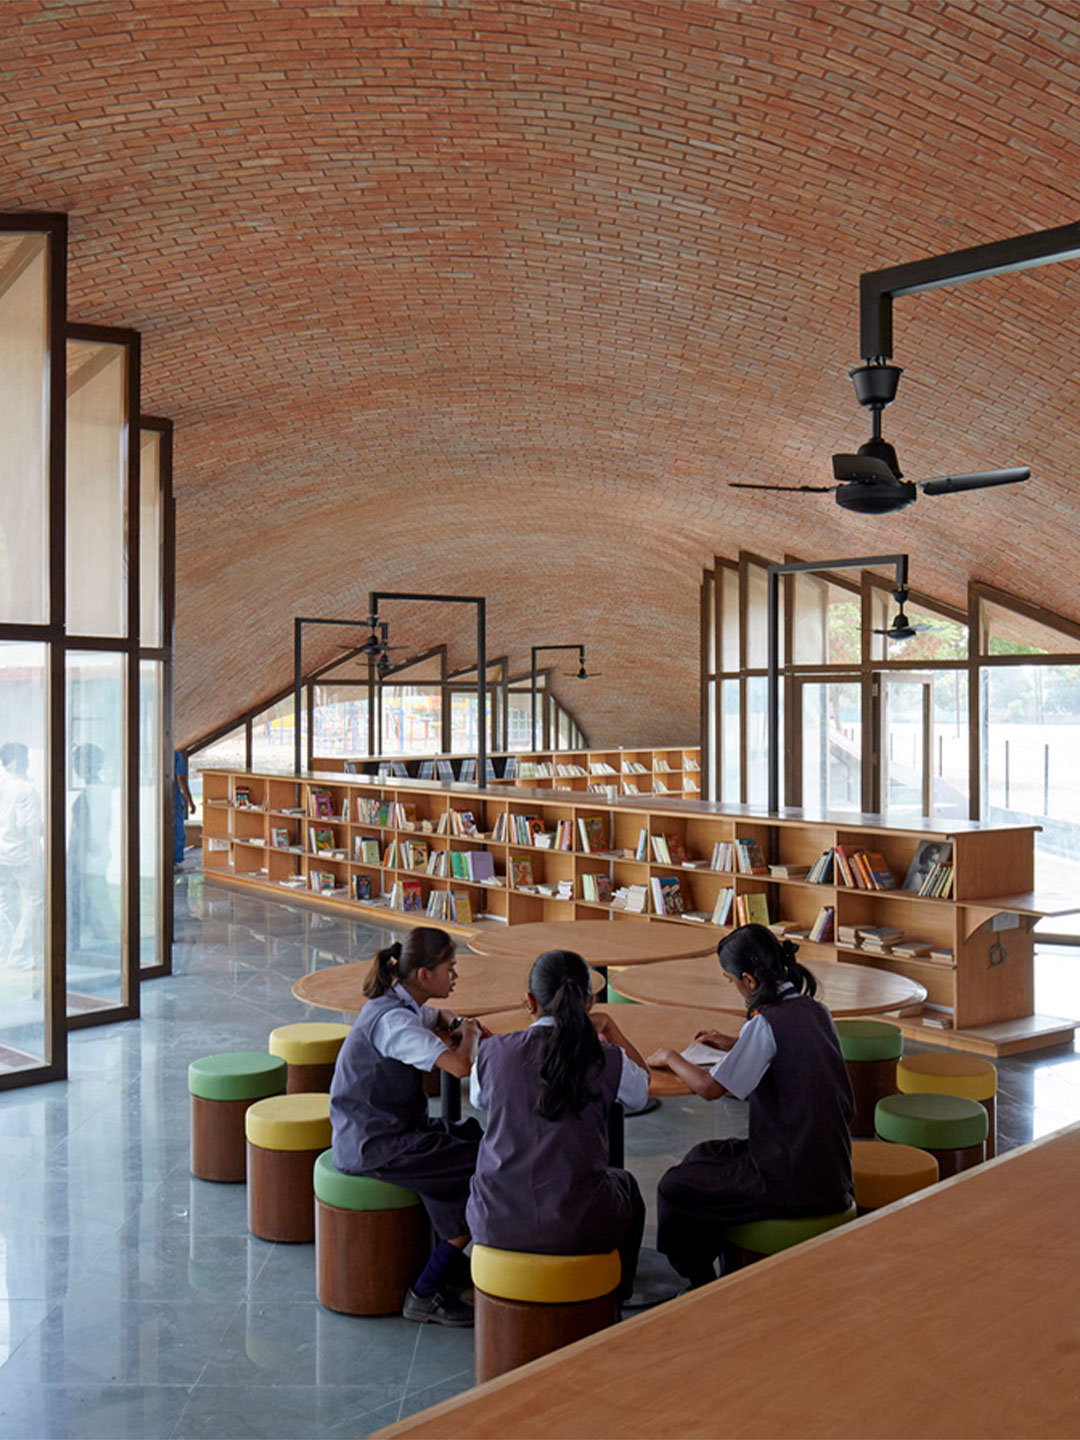 Designed by Sameep Padora & Associates, the Maya Somaiya Library in India rests at the intersection of students' daily routine. 